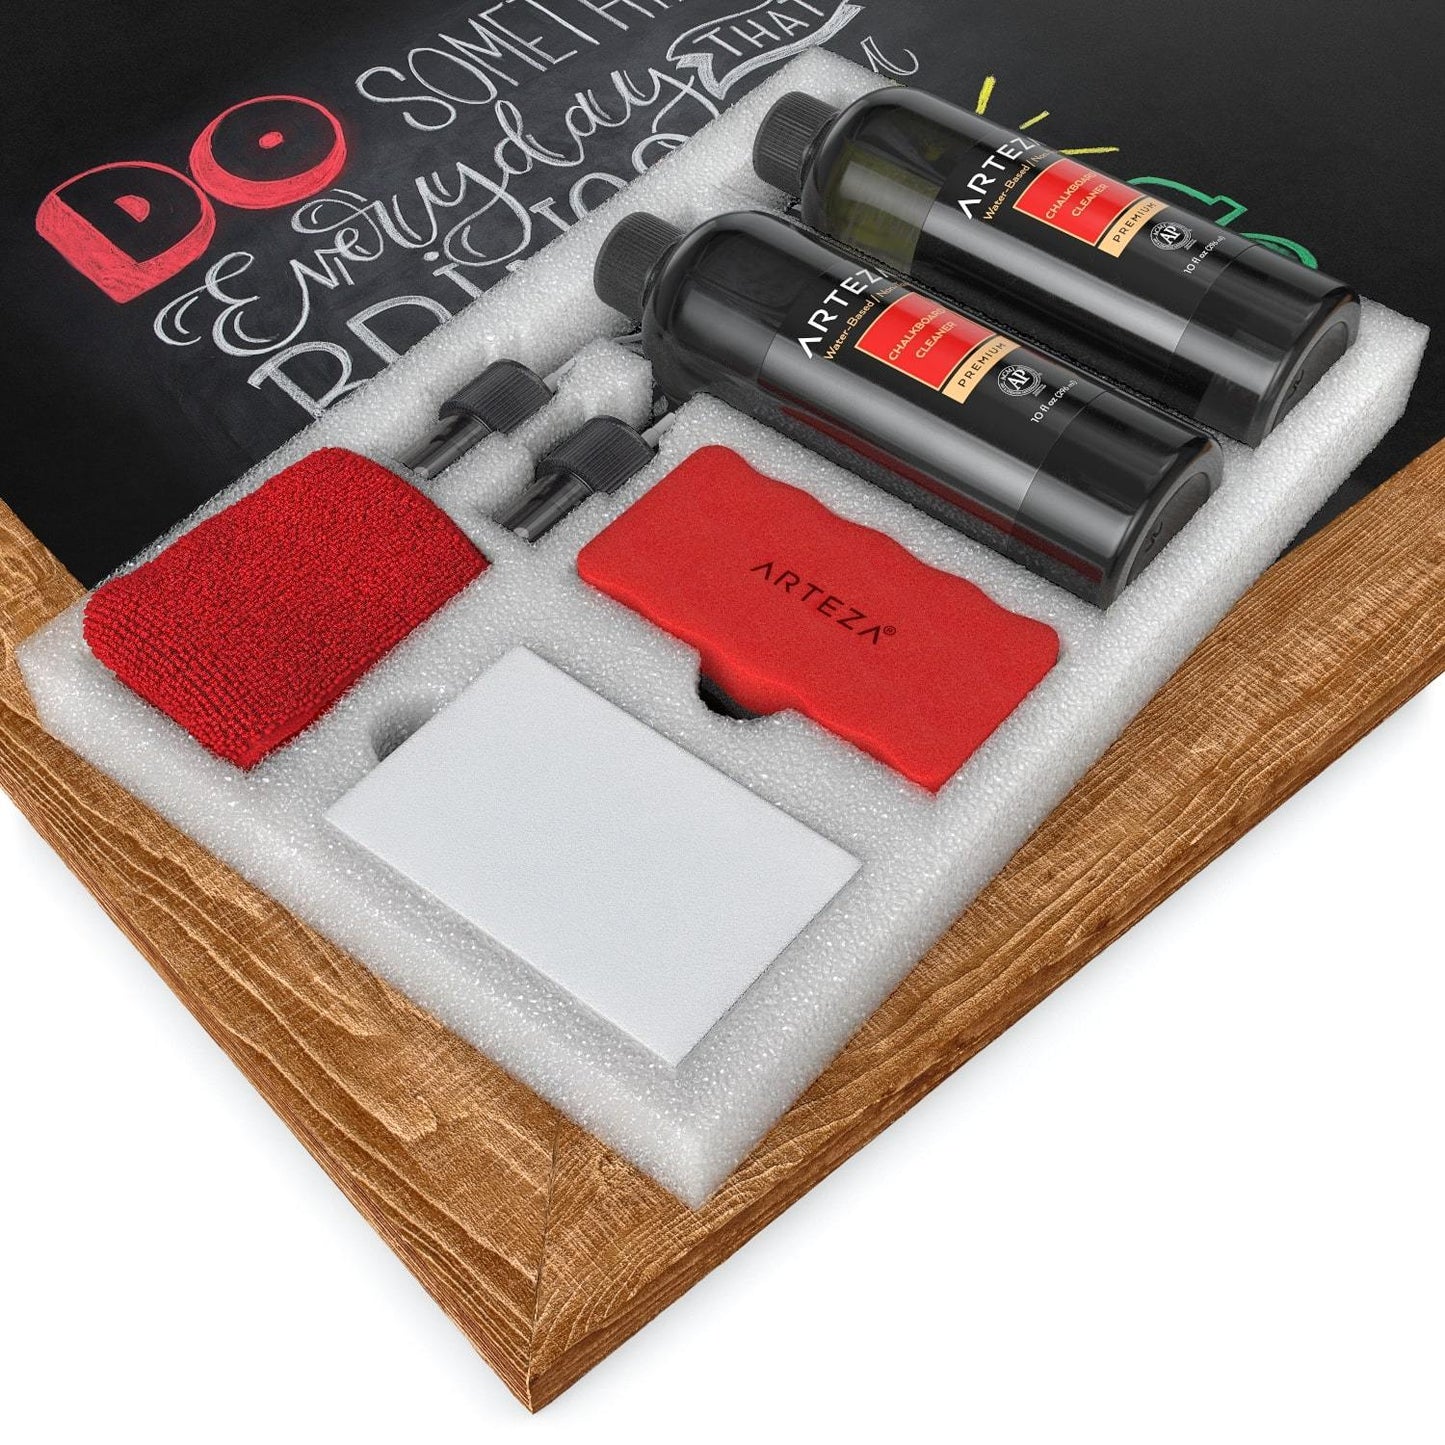 Chalkboard Cleaner Set with Magic Sponges